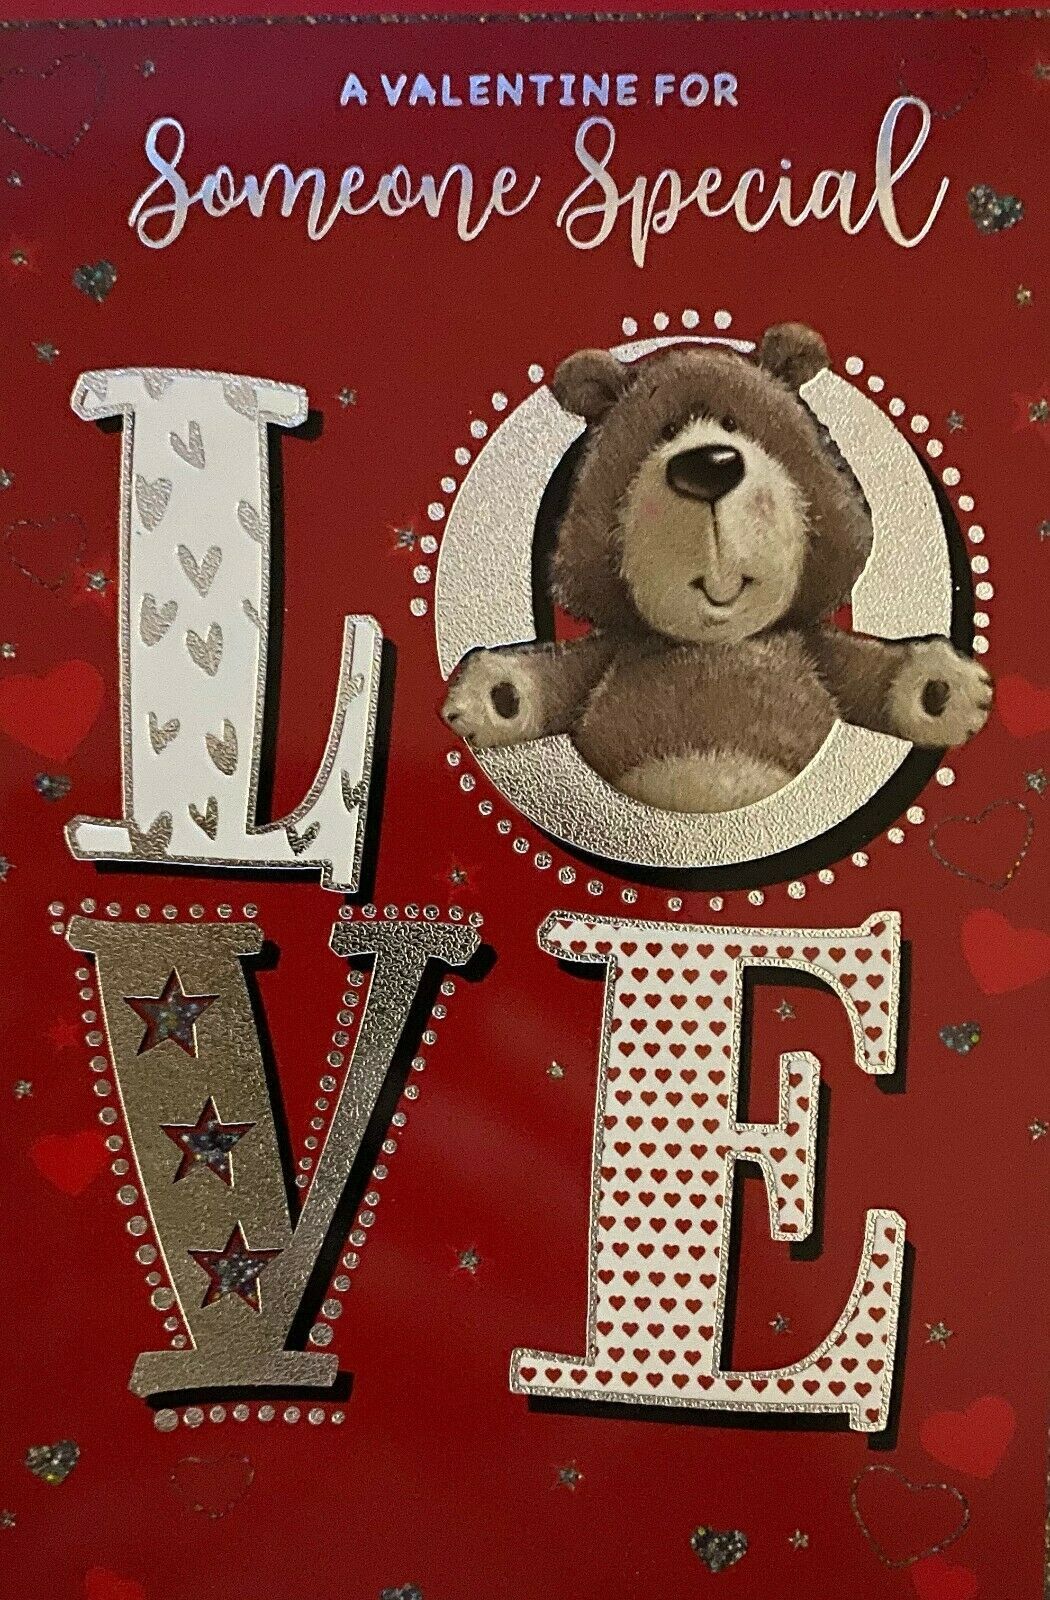 Valentine's Day Card A Valentine For Someone Special - Love Teddy